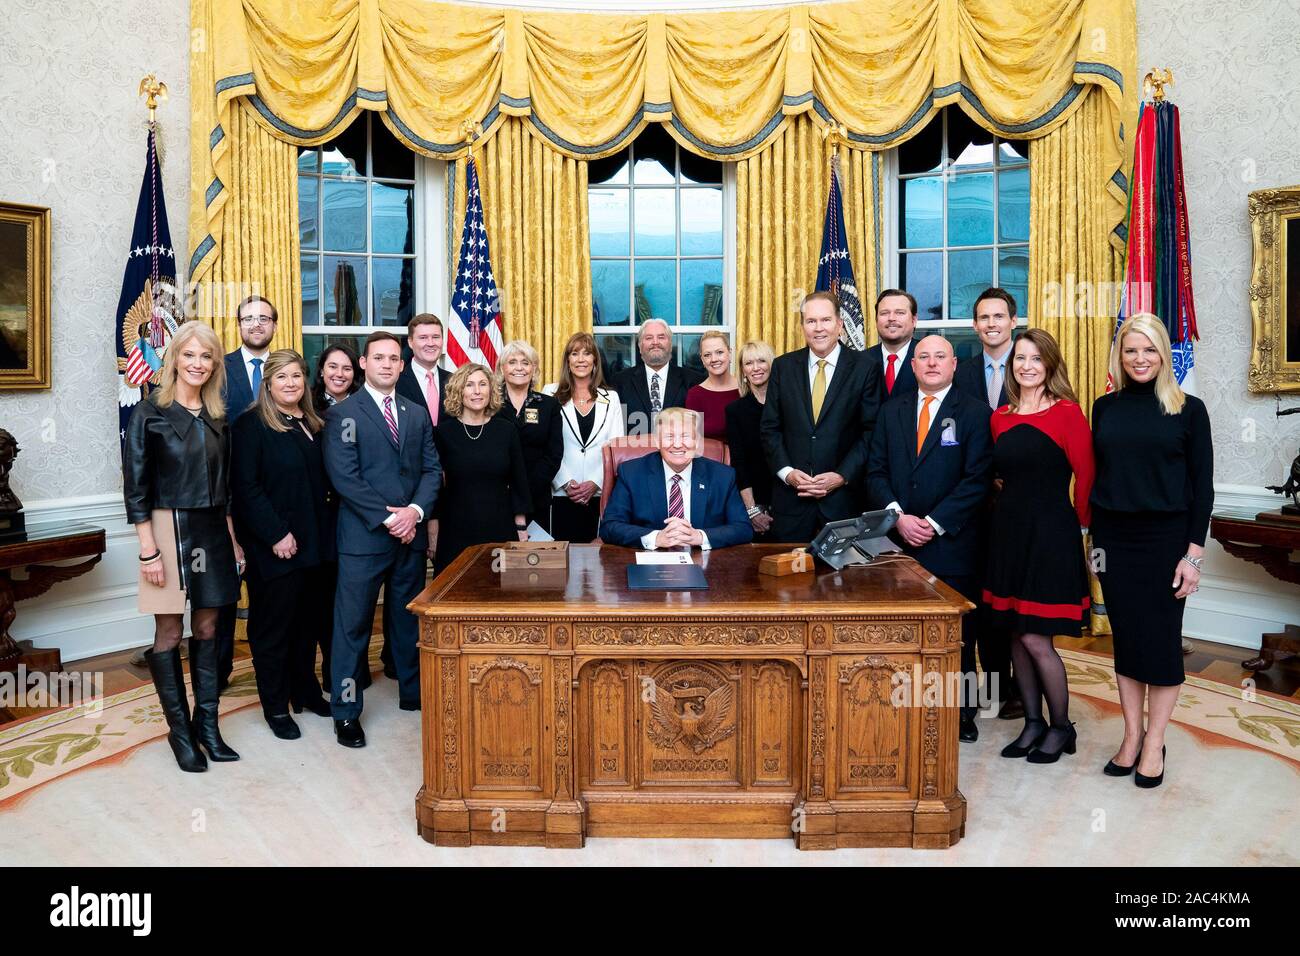 President Donald J. Trump poses for a photo with executives of the Humane Society, K9s for Warriors, American Wellness Action, National Animal Care and Control Association, American Humane and the Warrior Dogs Foundation, after signing H.R. 724: The Preventing Animal Cruelty and Torture Act Monday, Nov. 25, 2019, in the Oval Office of the White House. Stock Photo